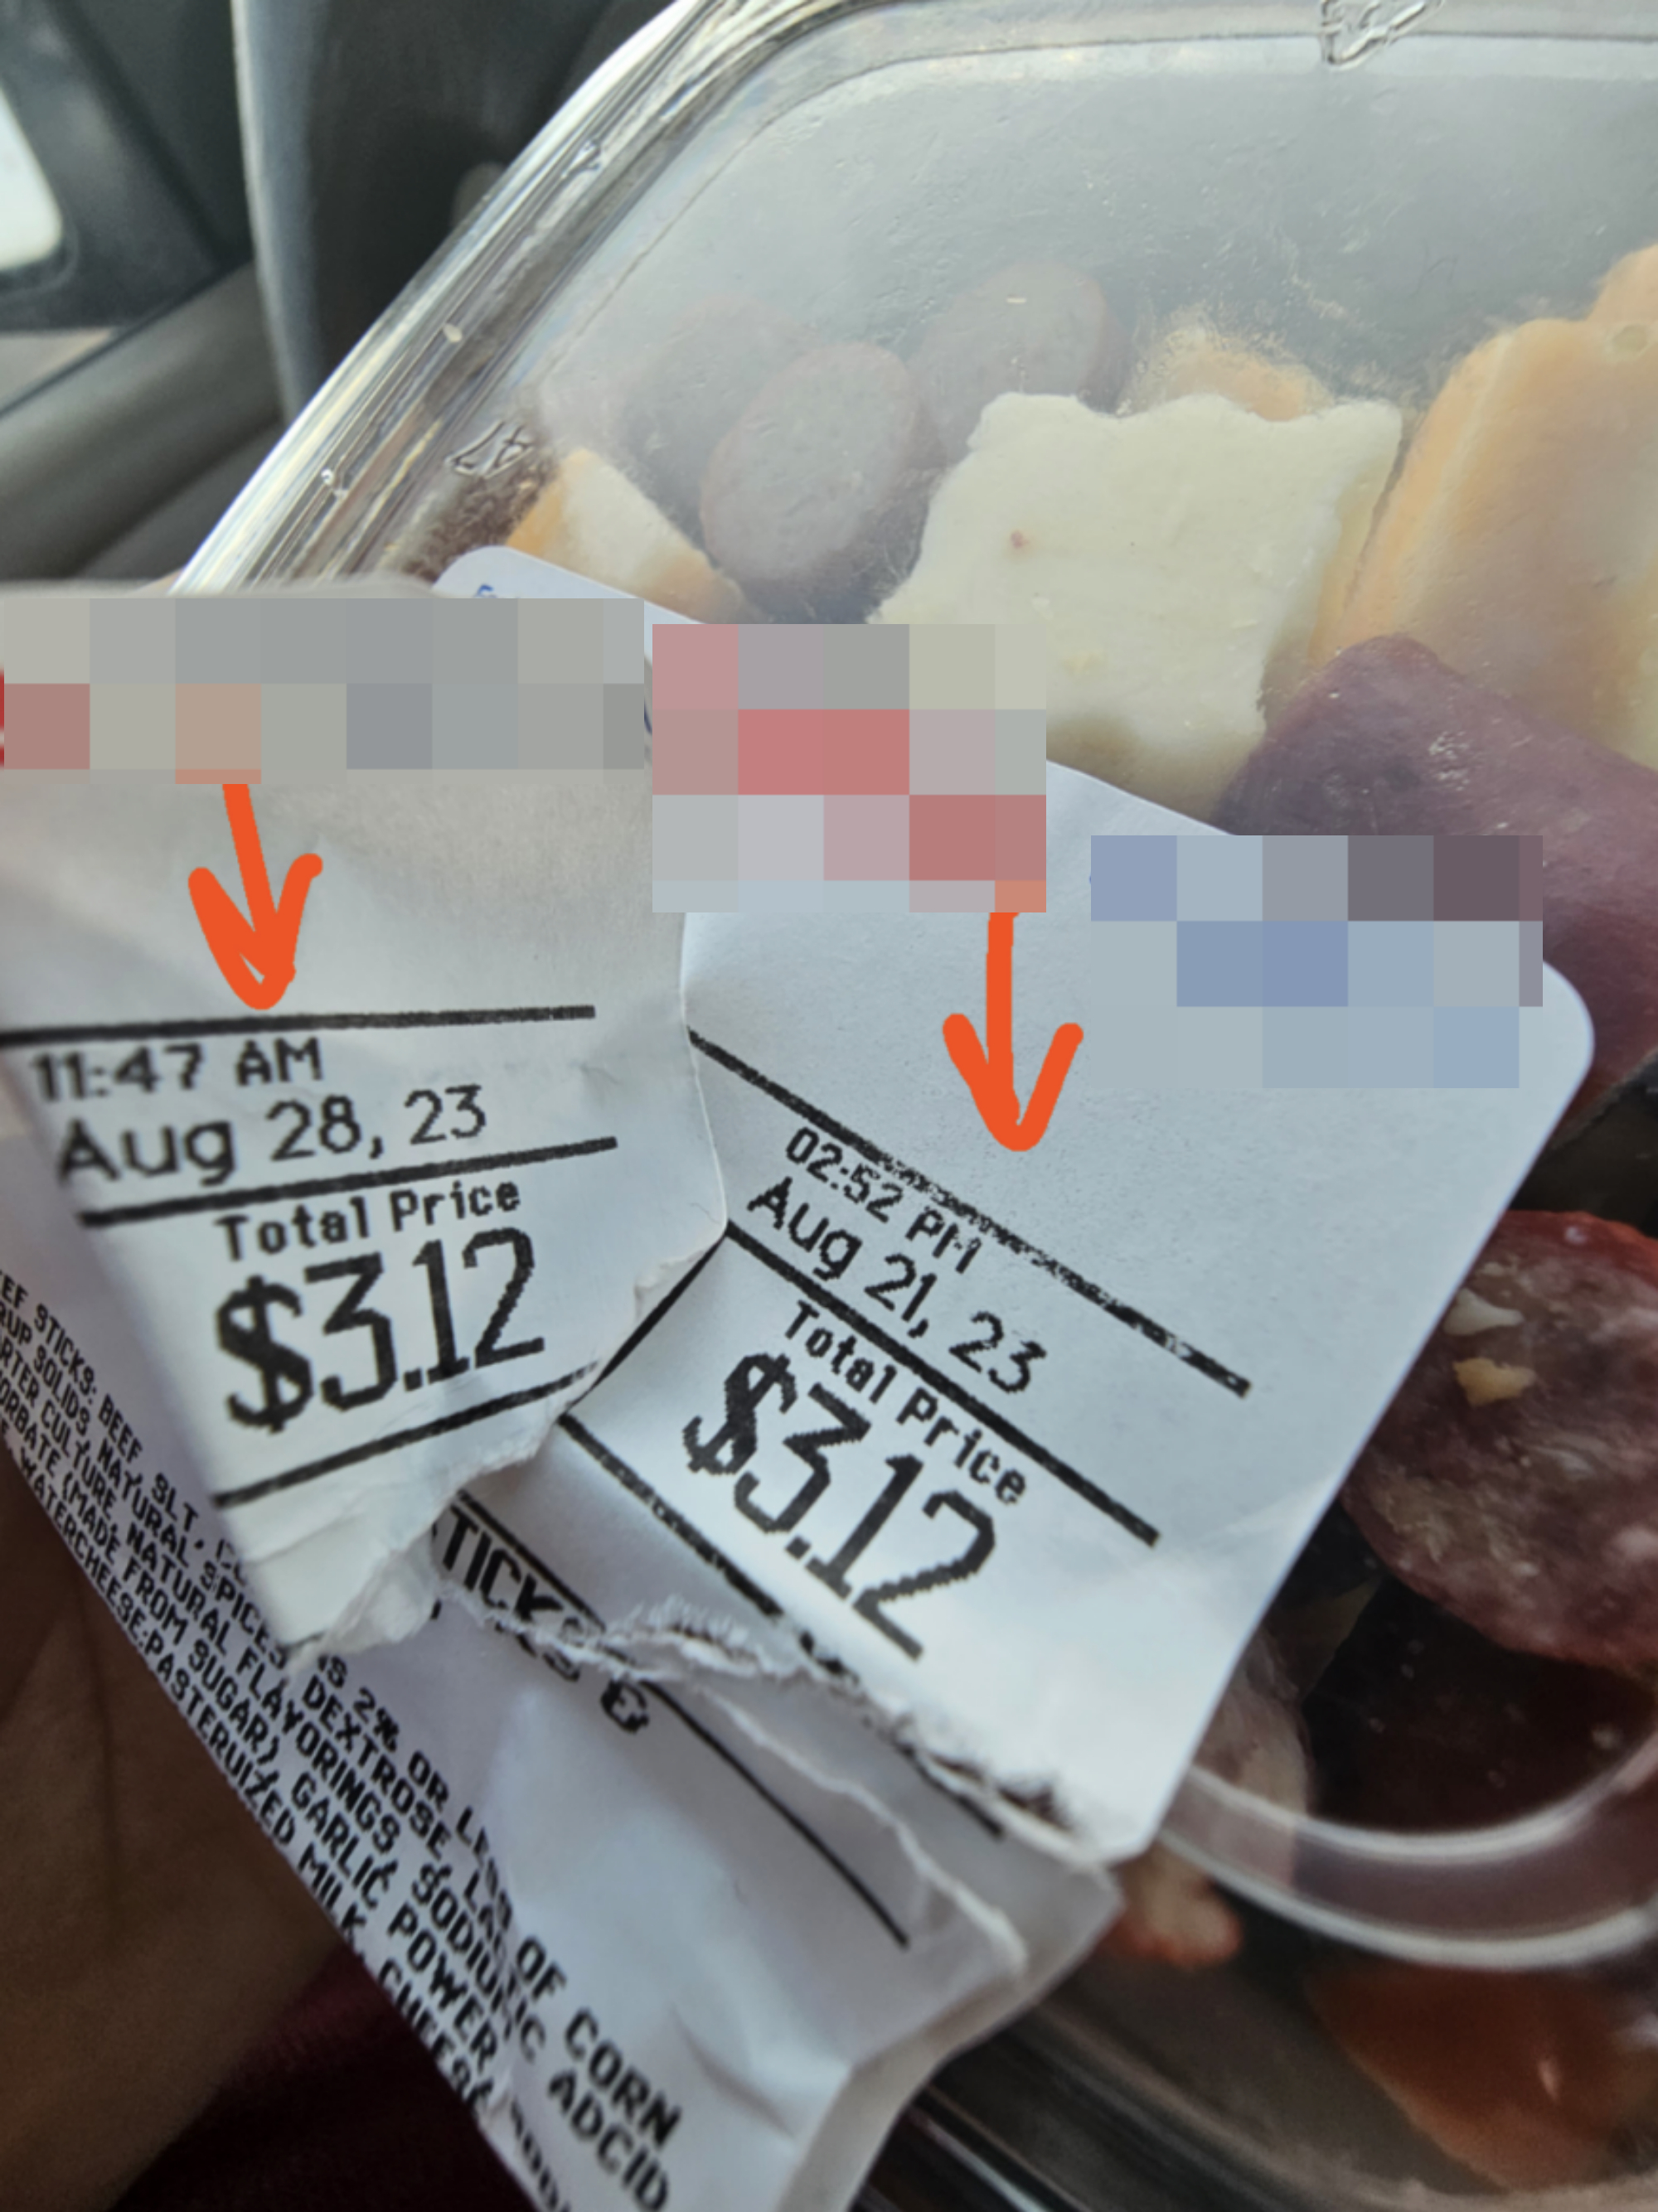 The same item has two stickers on it; the top sticker says the expiration date is Aug. 28, but when it&#x27;s ripped off, it reveals the sticker below has an expiration date of Aug. 21